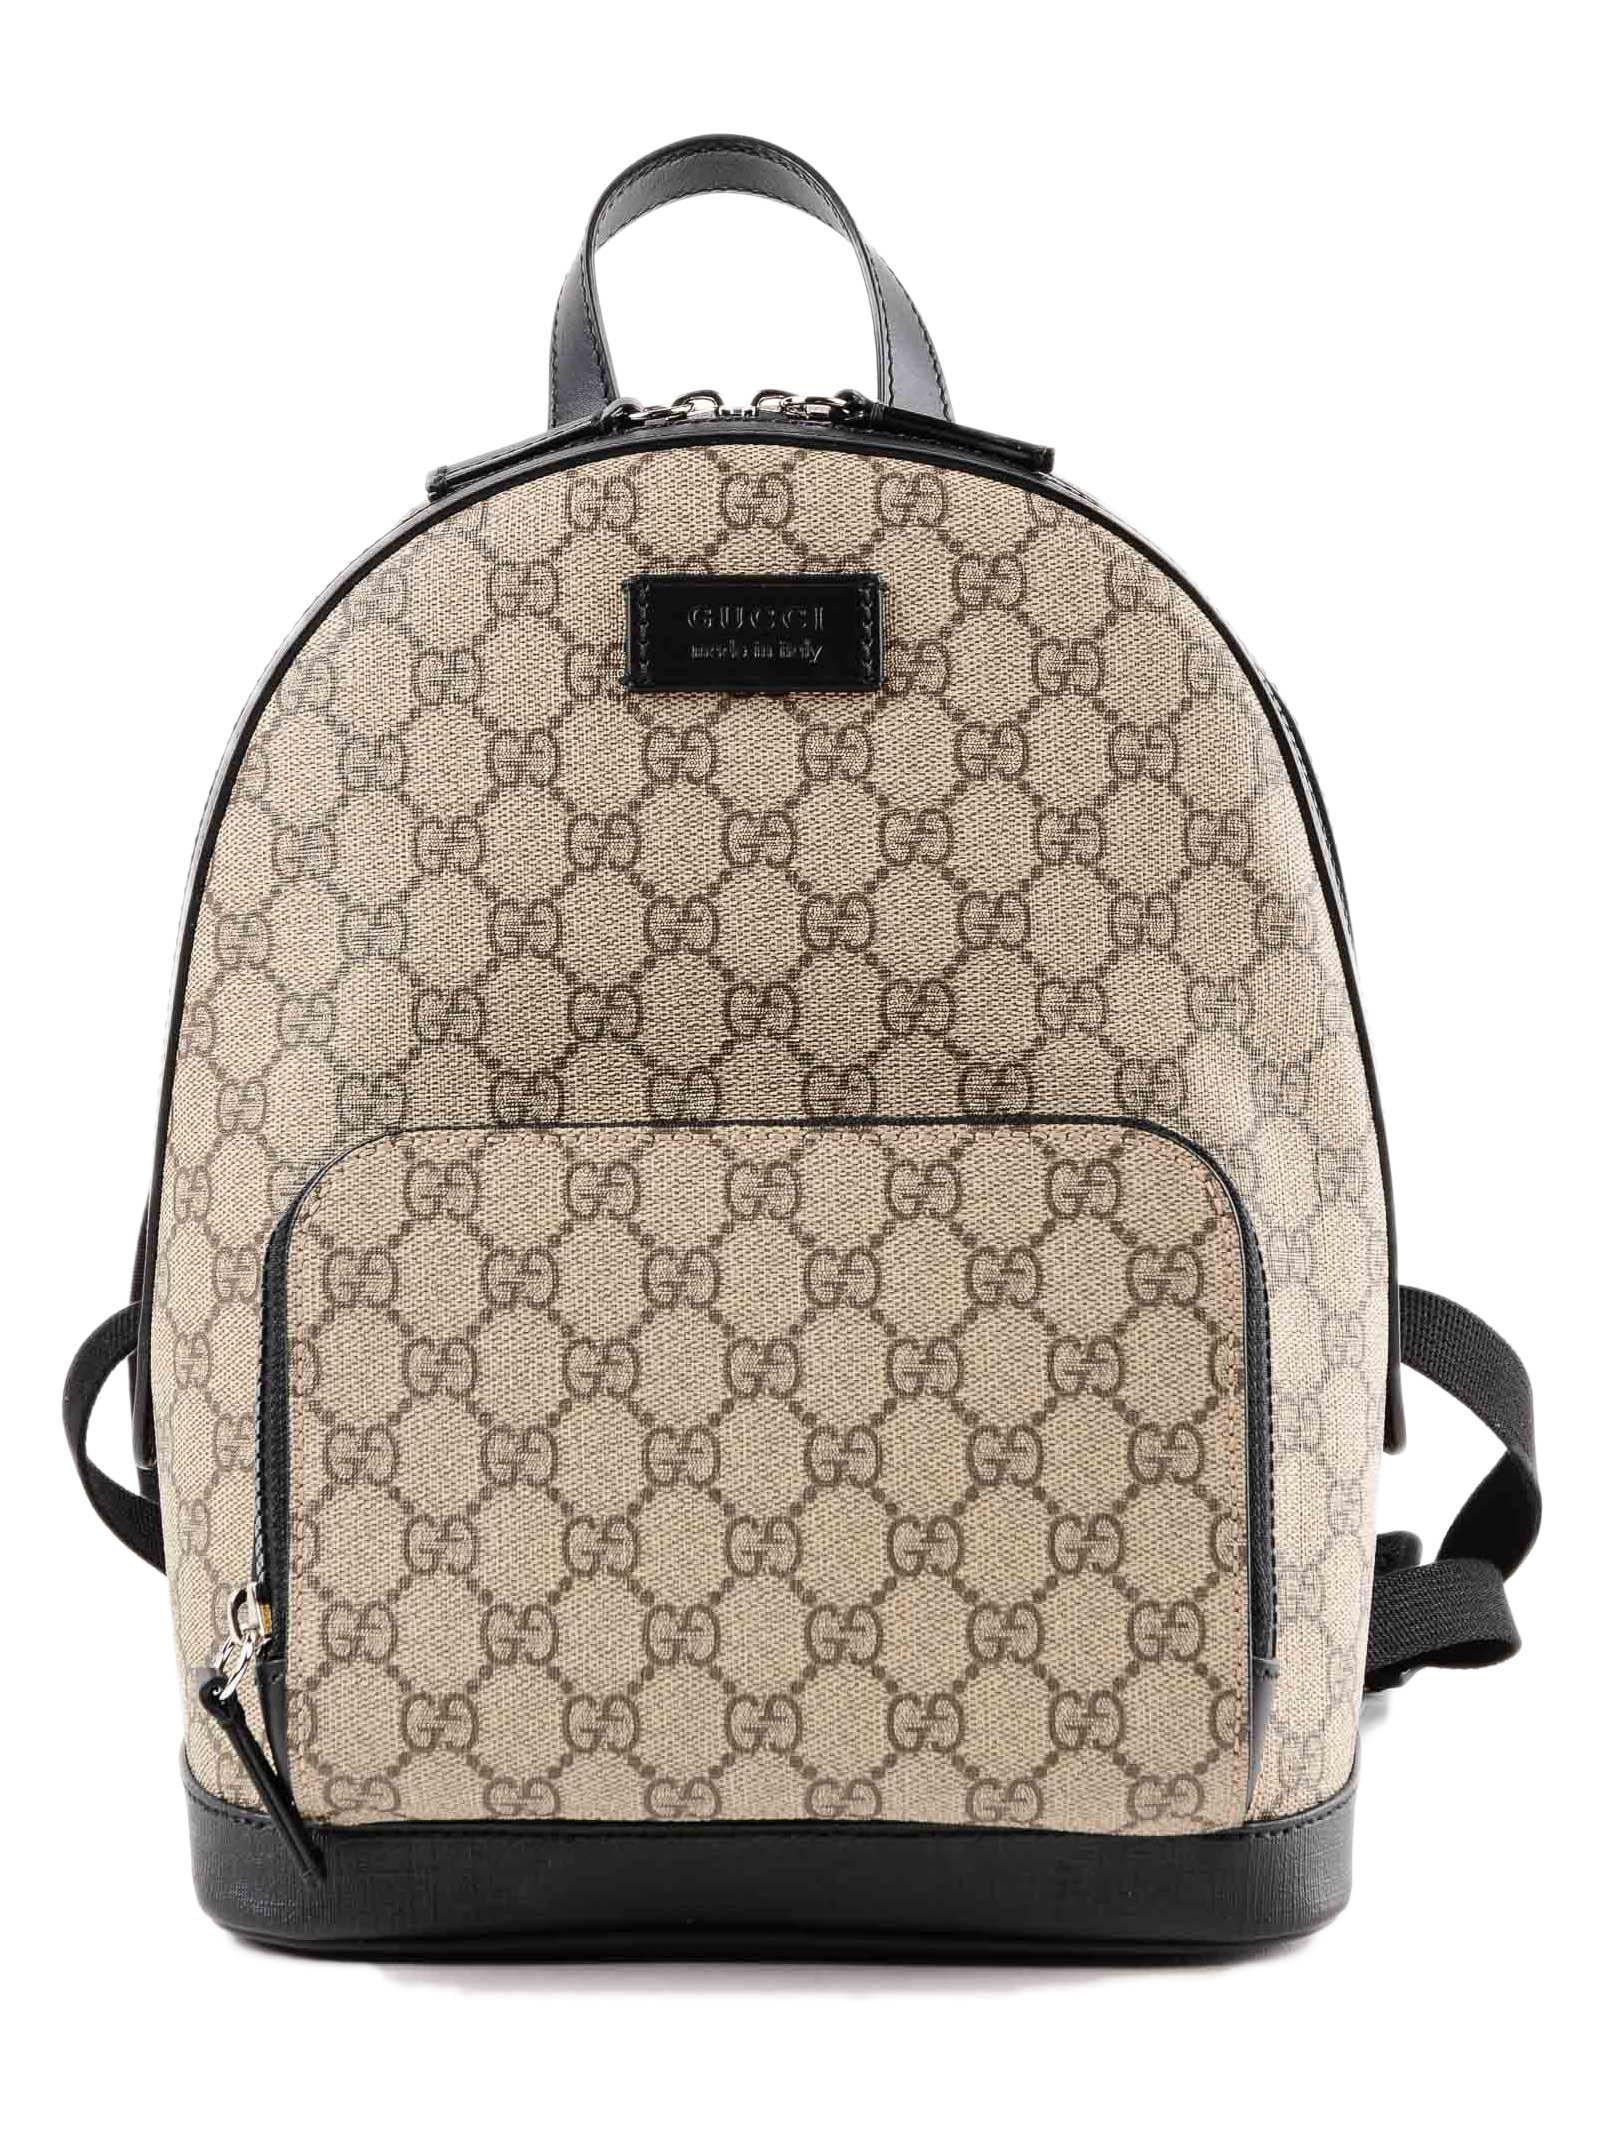 Gucci Canvas GG Supreme Small Backpack for Men - Lyst